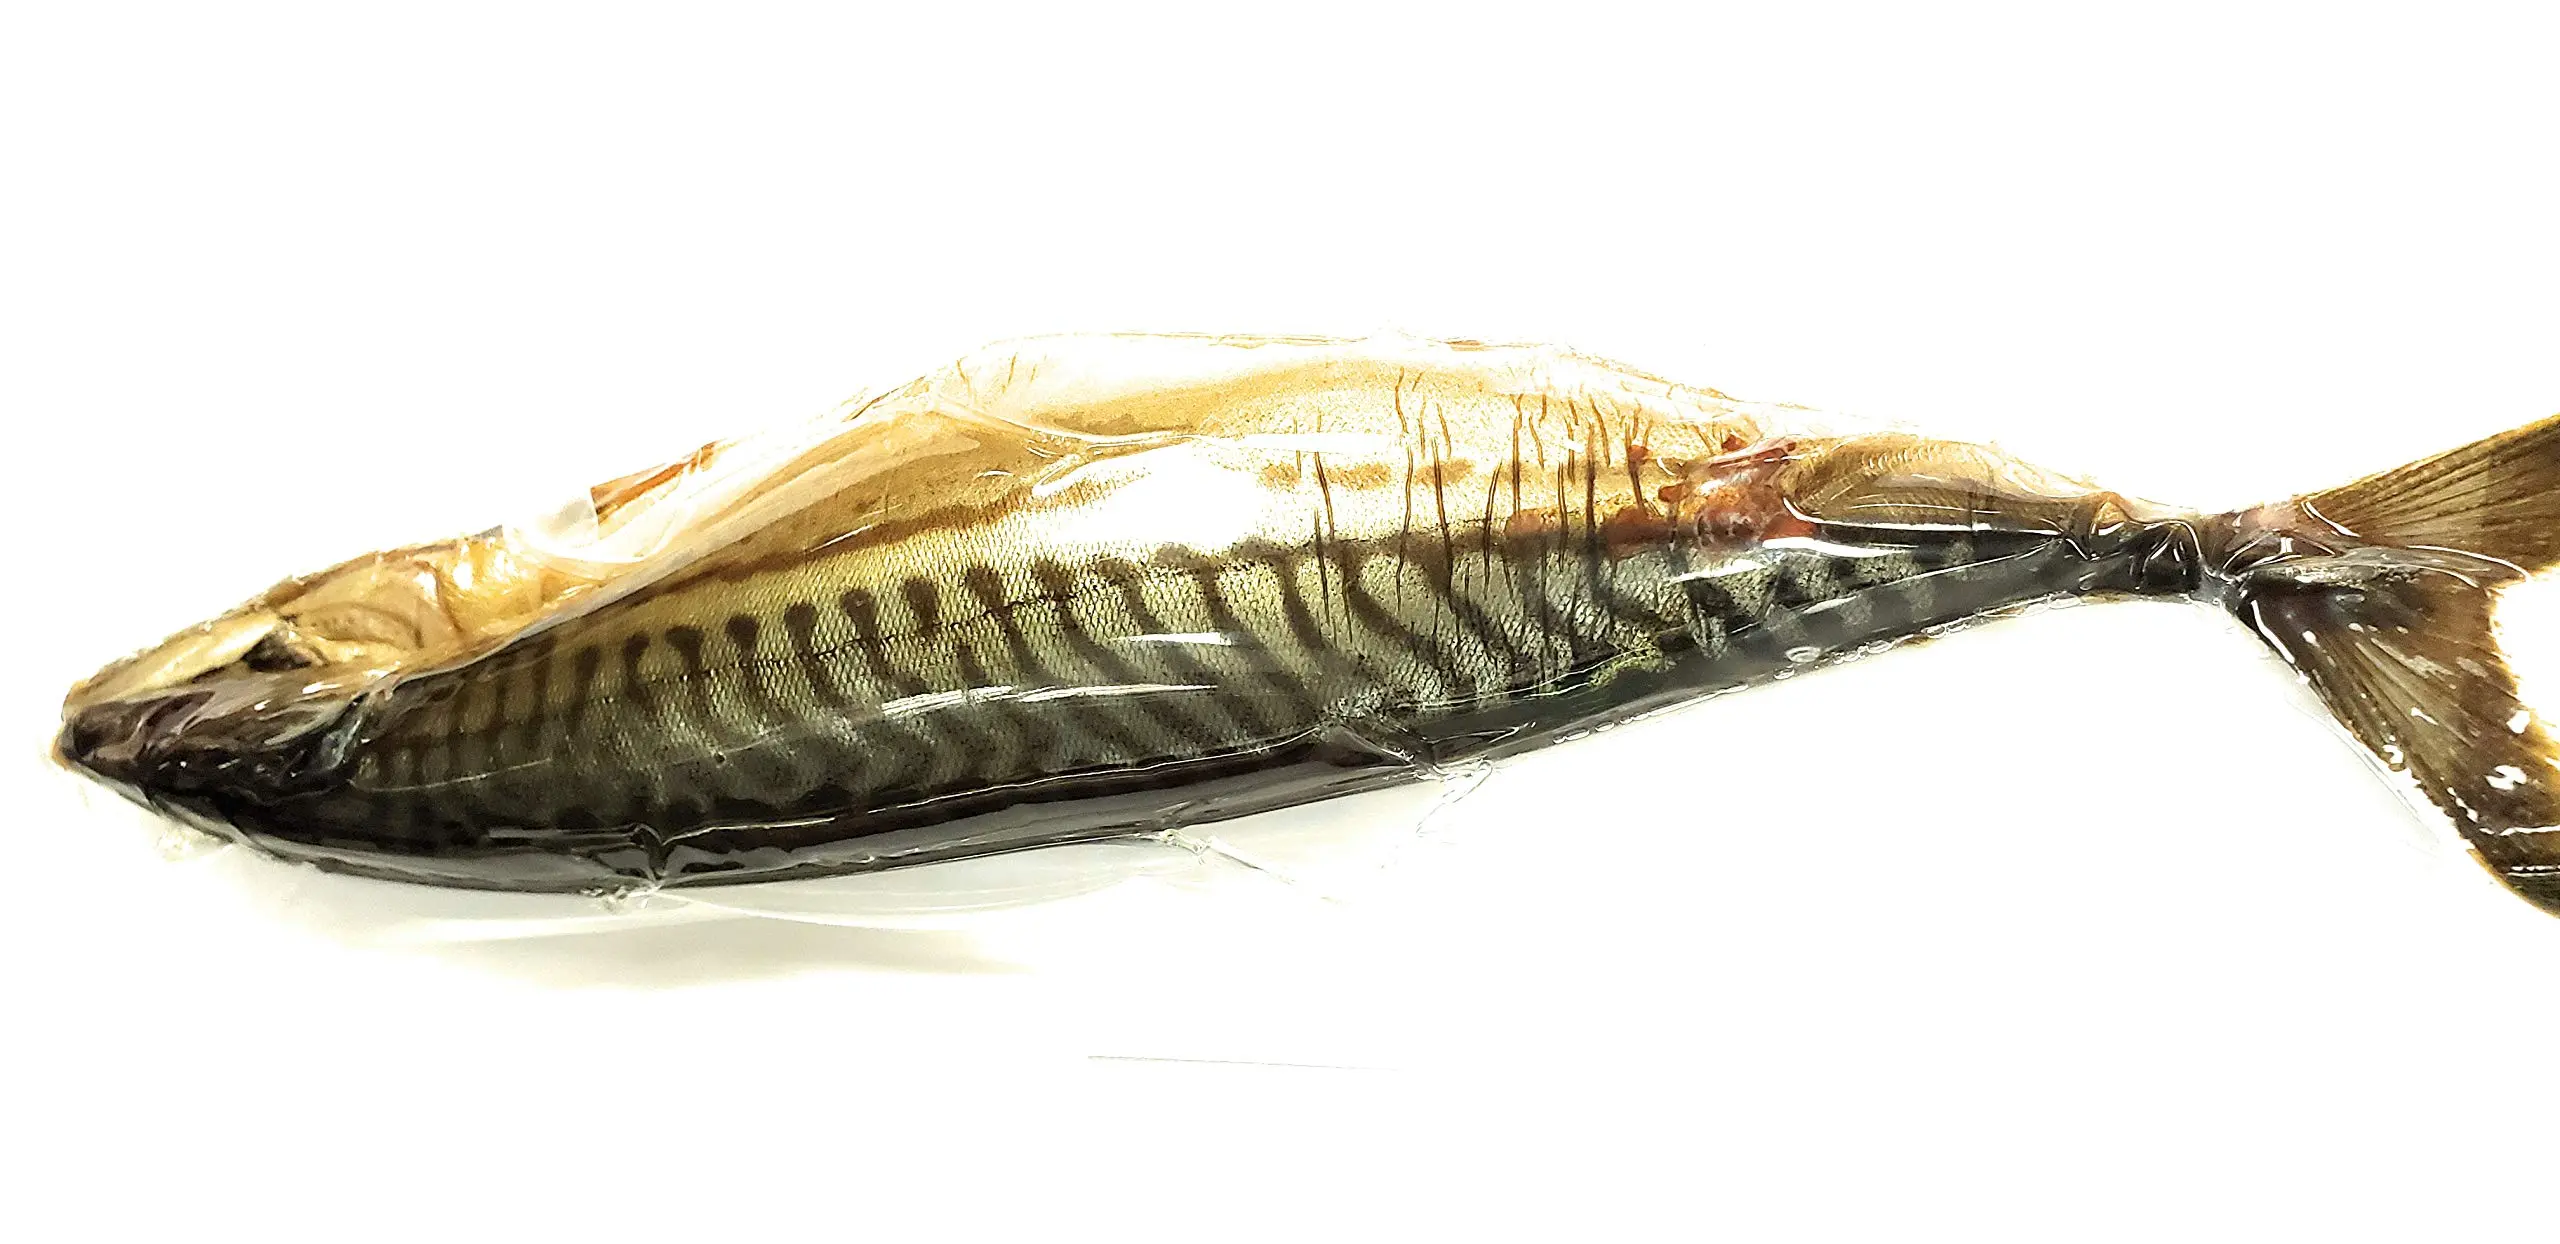 cold smoked mackerel fillets - Can you eat mackerel fillets cold